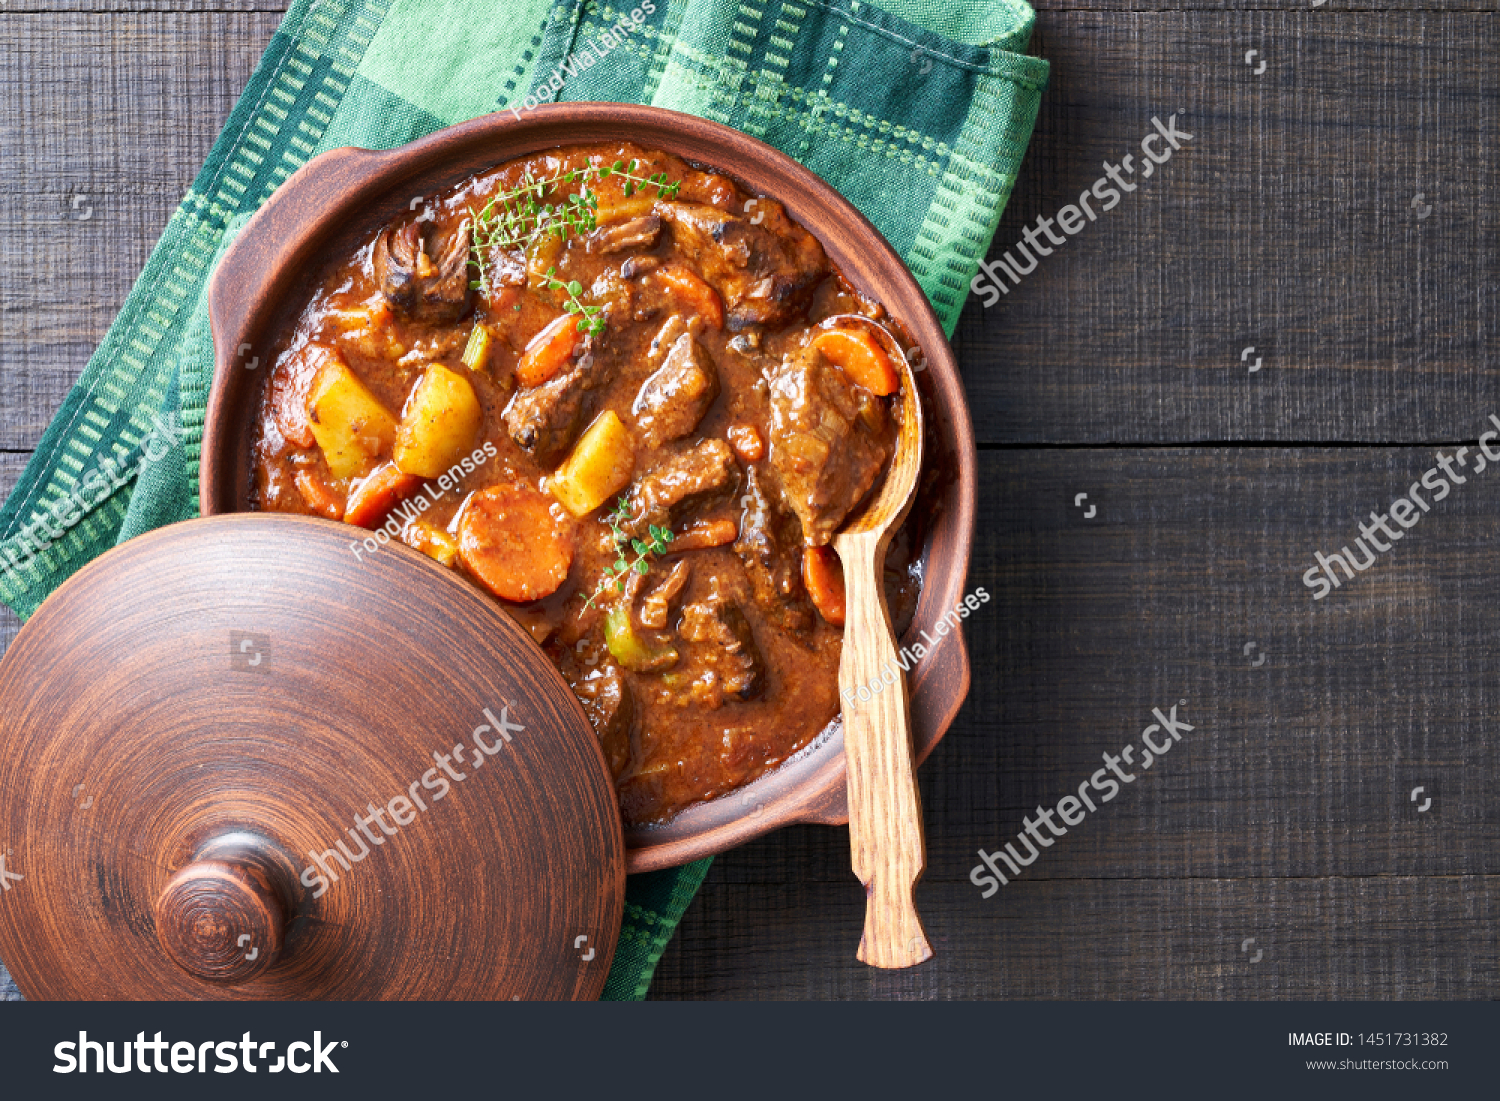 Hearty beer and lamb stew, with potato, carrot, stewed in a dark beer, with thyme stems, served in a clay pot with irish soda bread on a wooden background, top view, copy space #1451731382